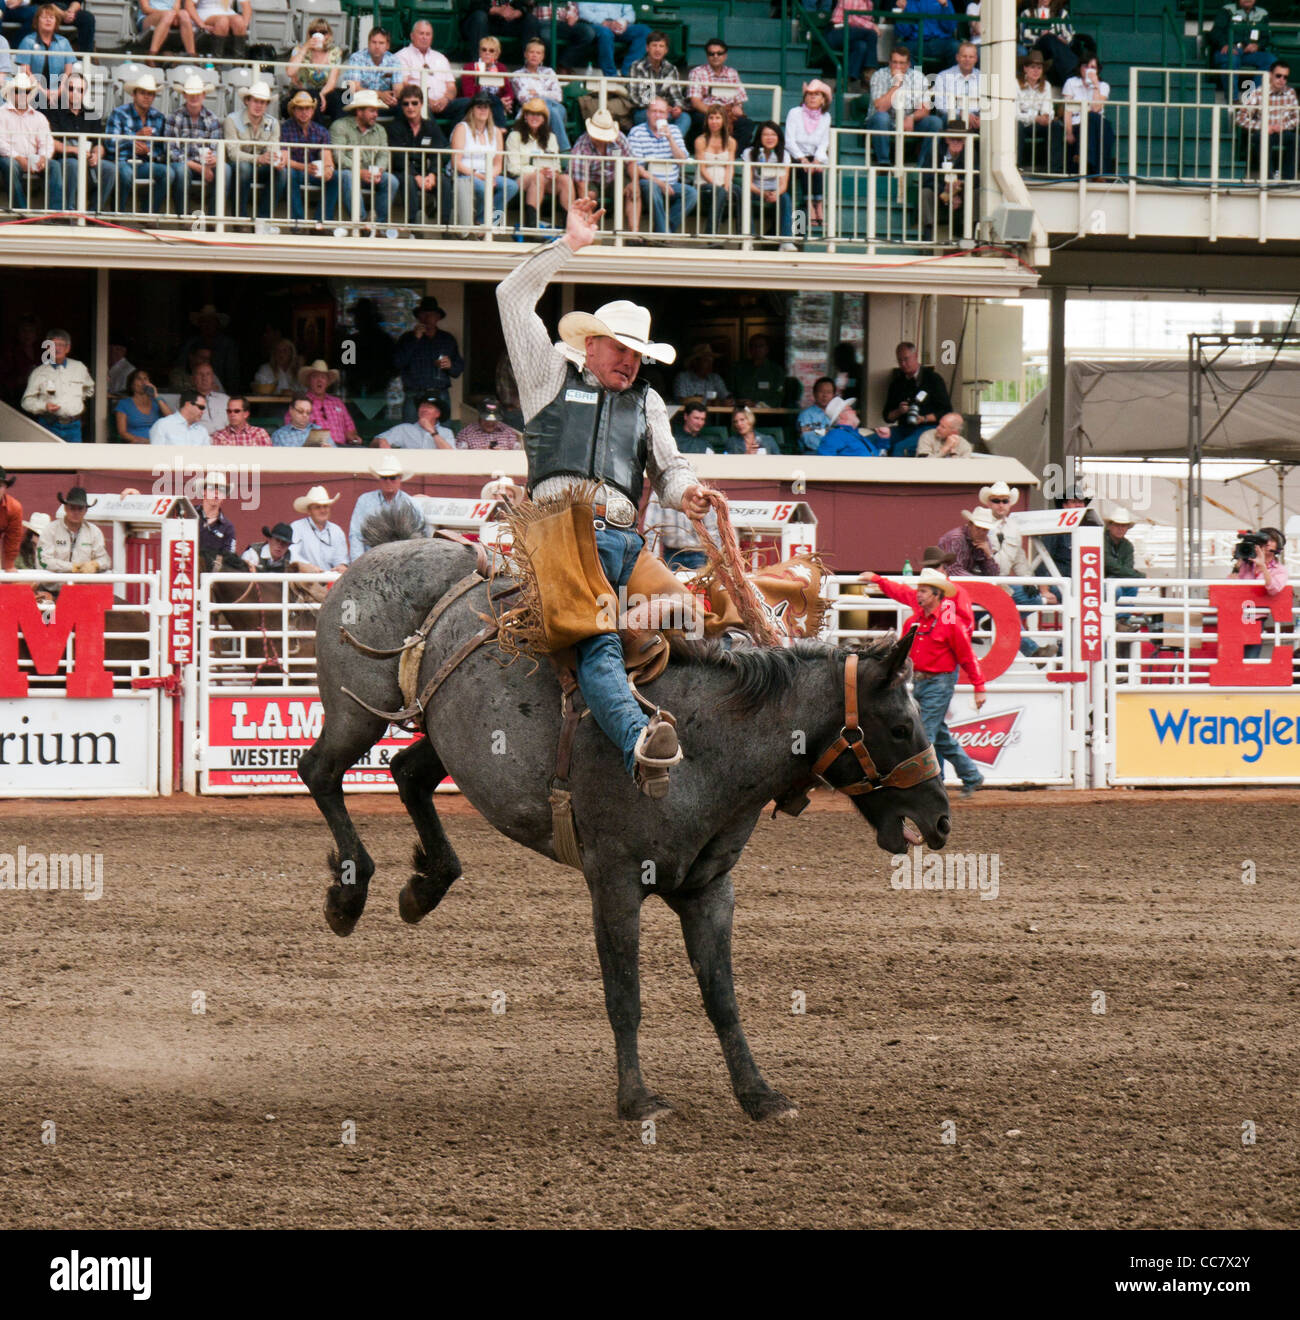 Bareback rodeo event at the Calgary Stampede in Canada Stock Photo